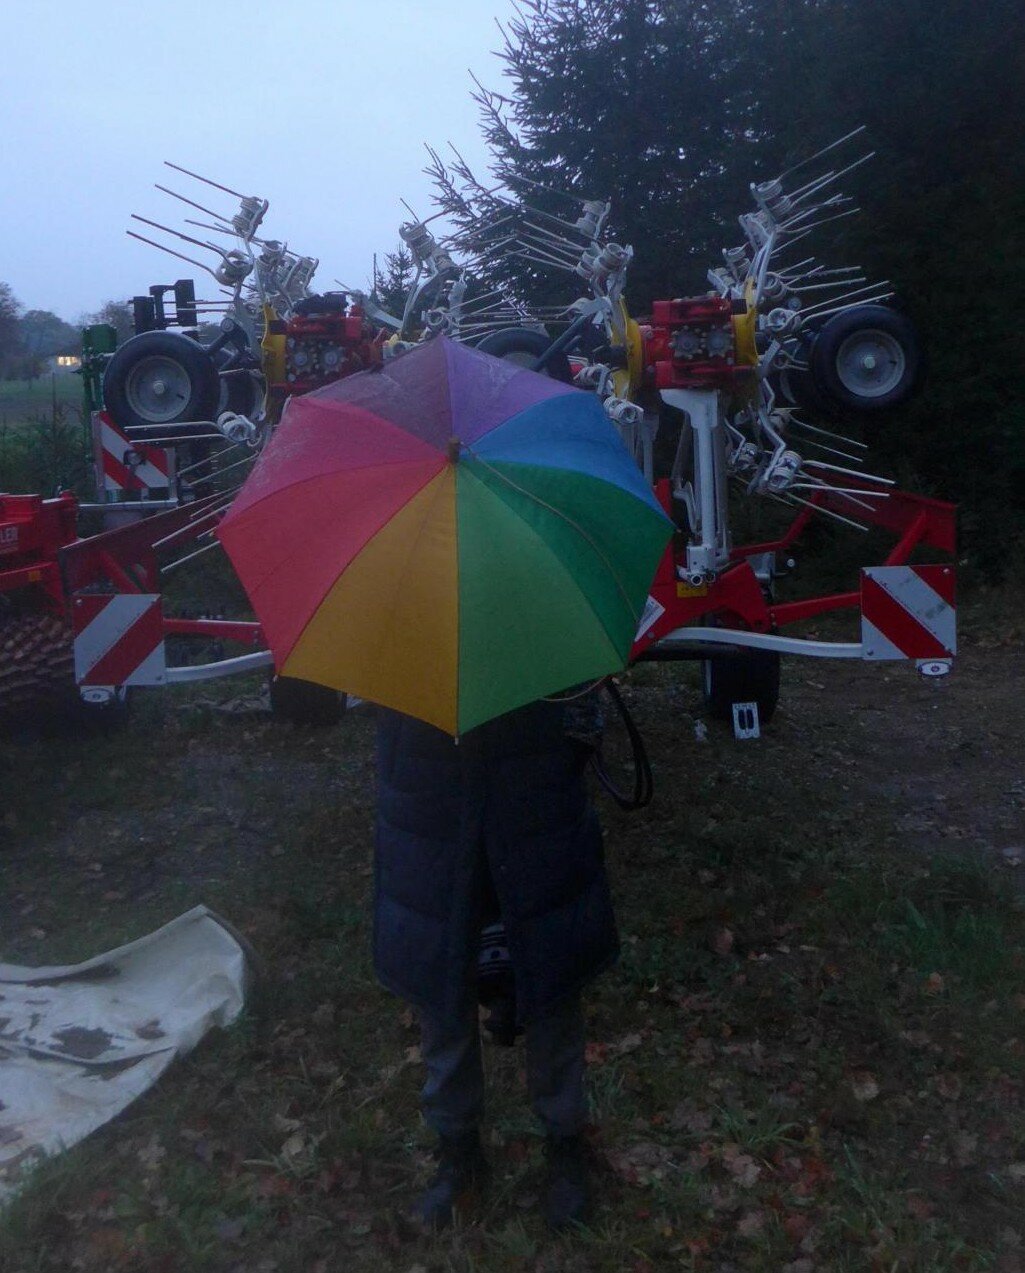 an image or two from my Pixelfed, shows a person with a rainbow unbrella in front of a scary farm machine